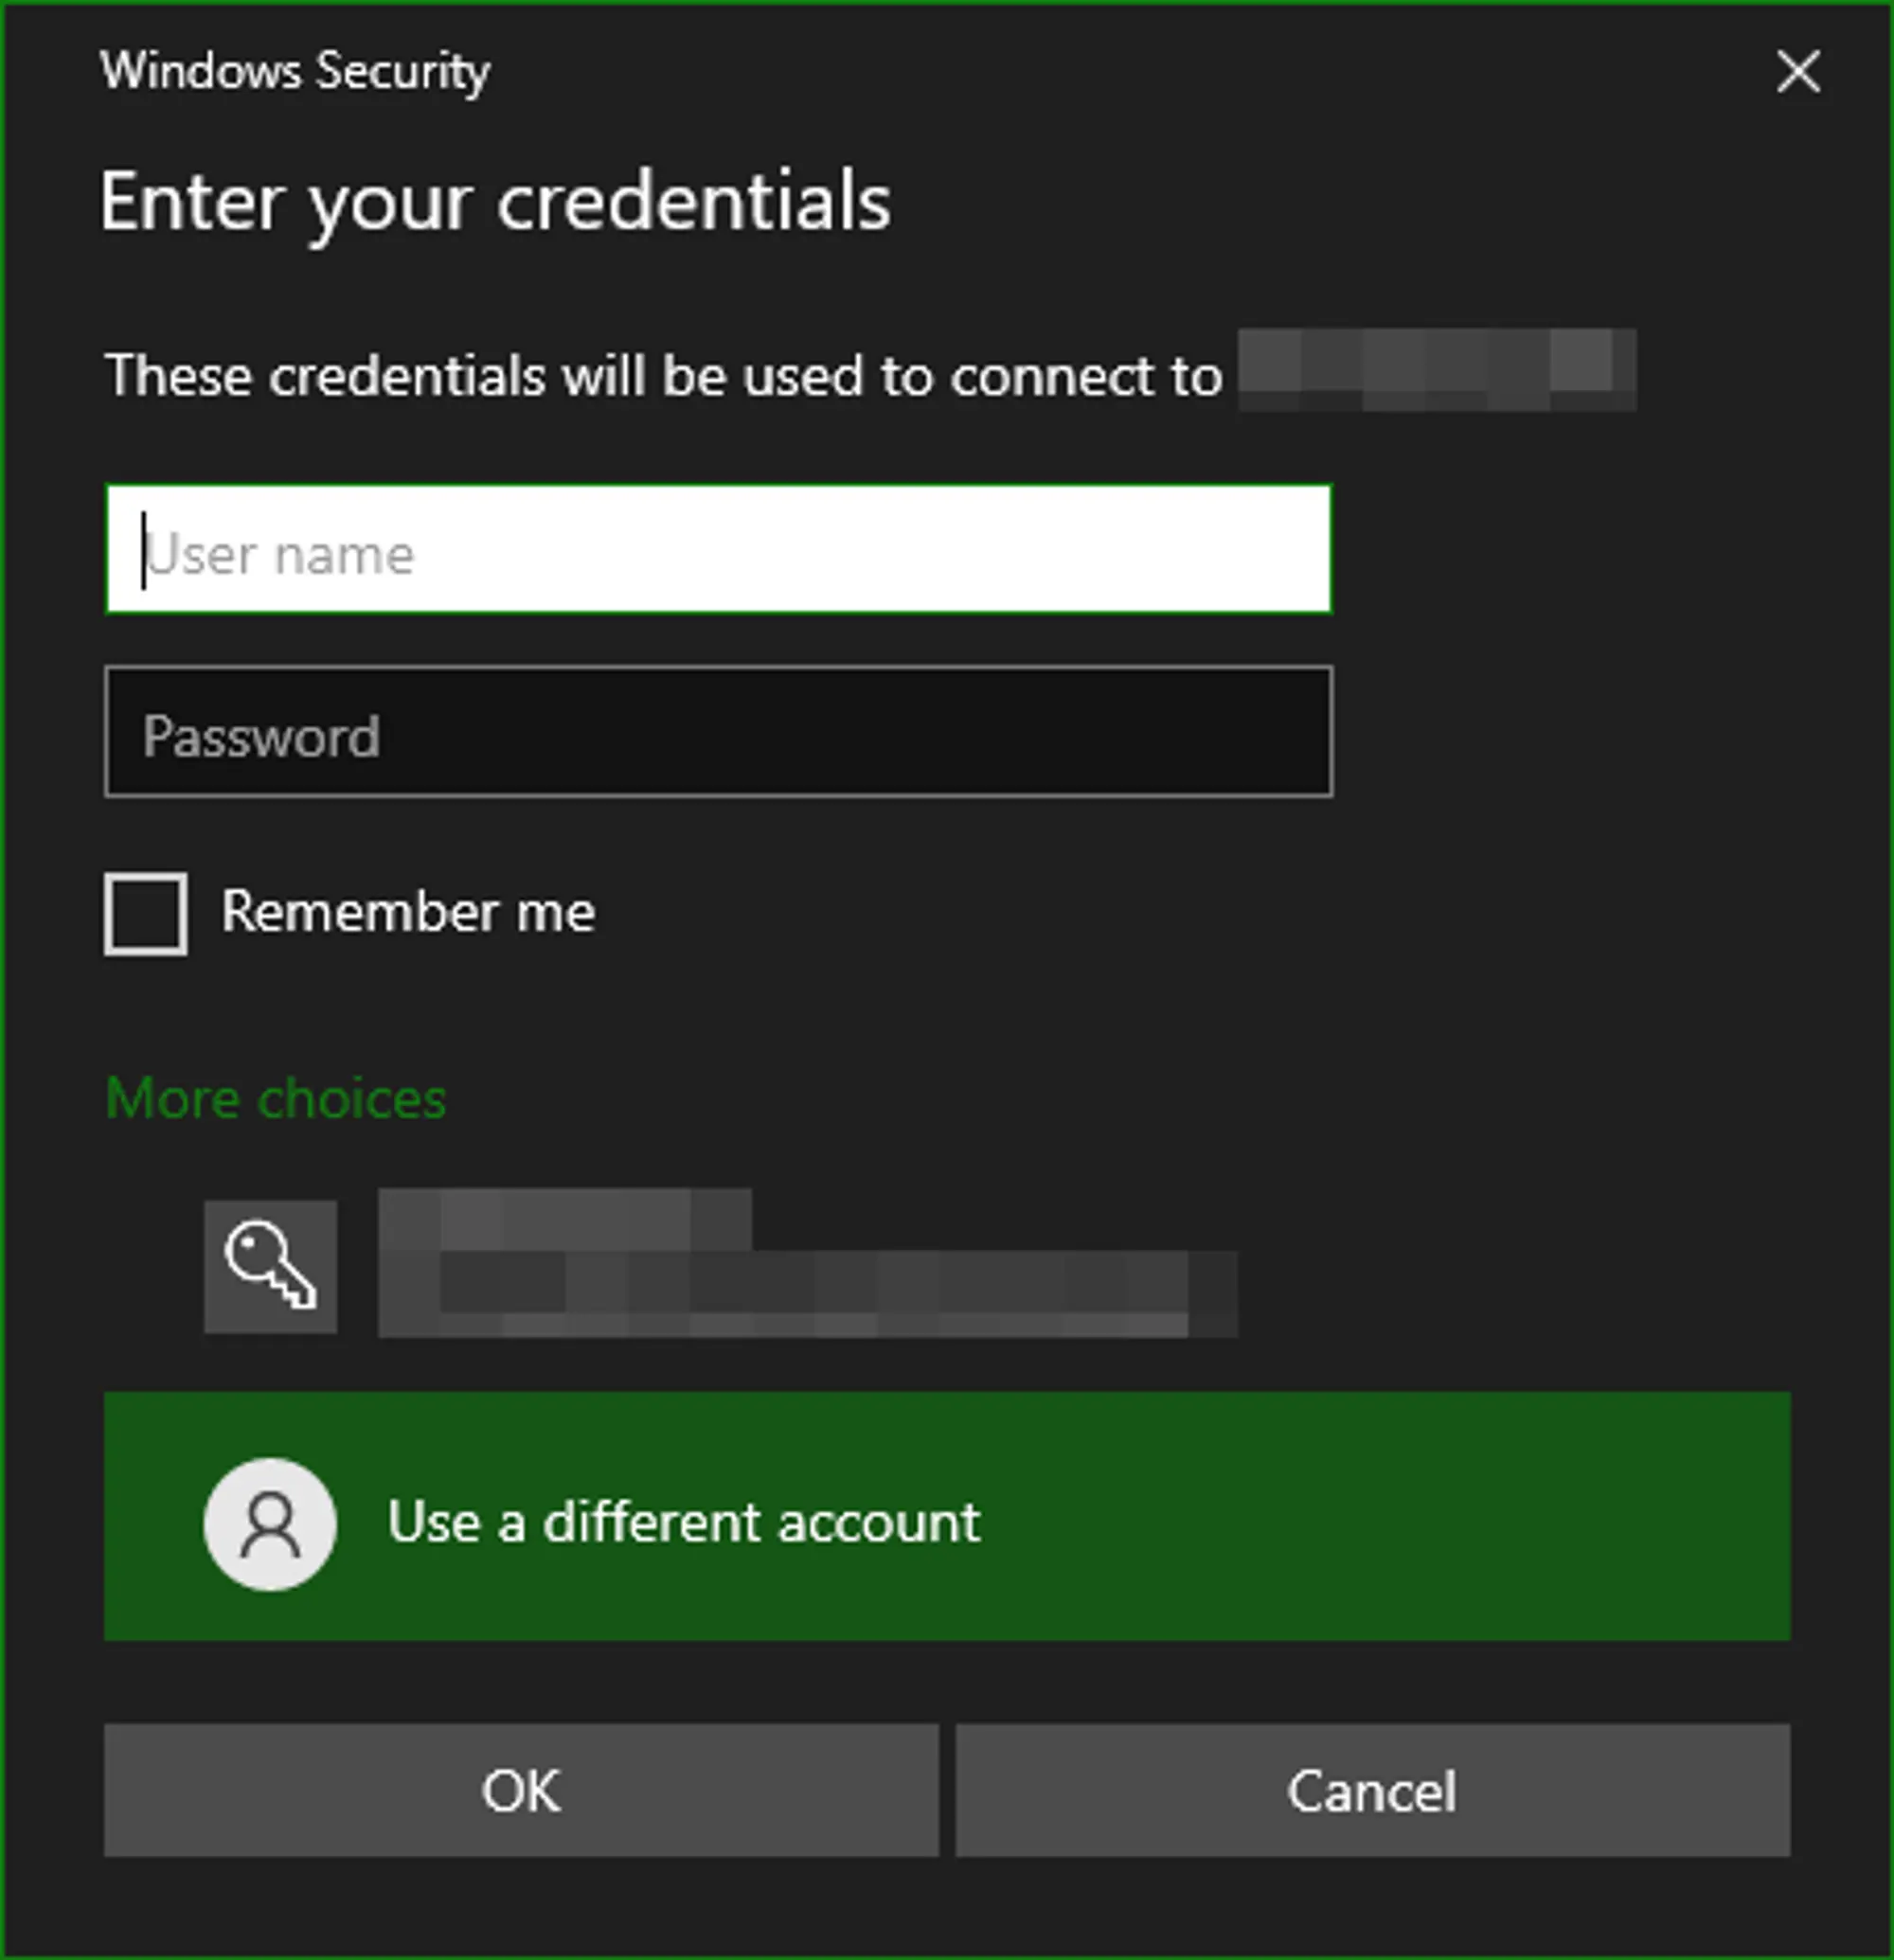 A Windows Security popup with both a username and password screen, and the “More choices” toggle expanded. Below “More choices” is the current Windows account and the option to “Use a different account”. 